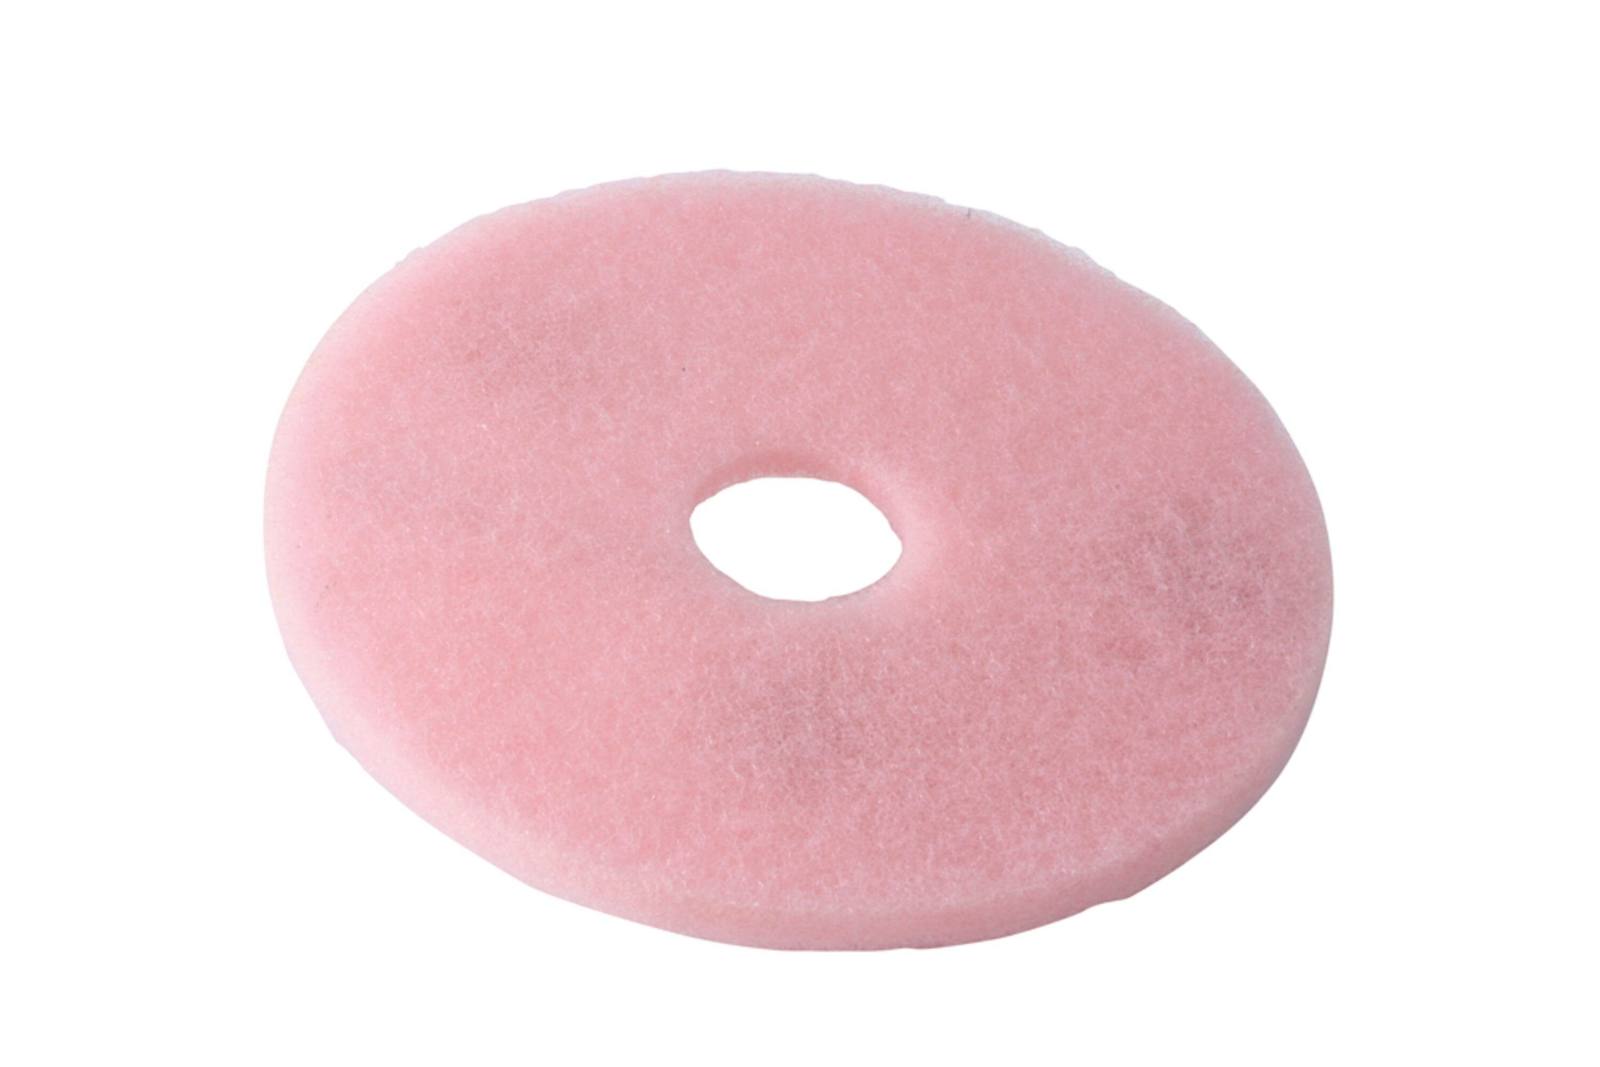 3M Scotch-Brite Eraser cleaning and polishing pad 3600, pink, 480 mm